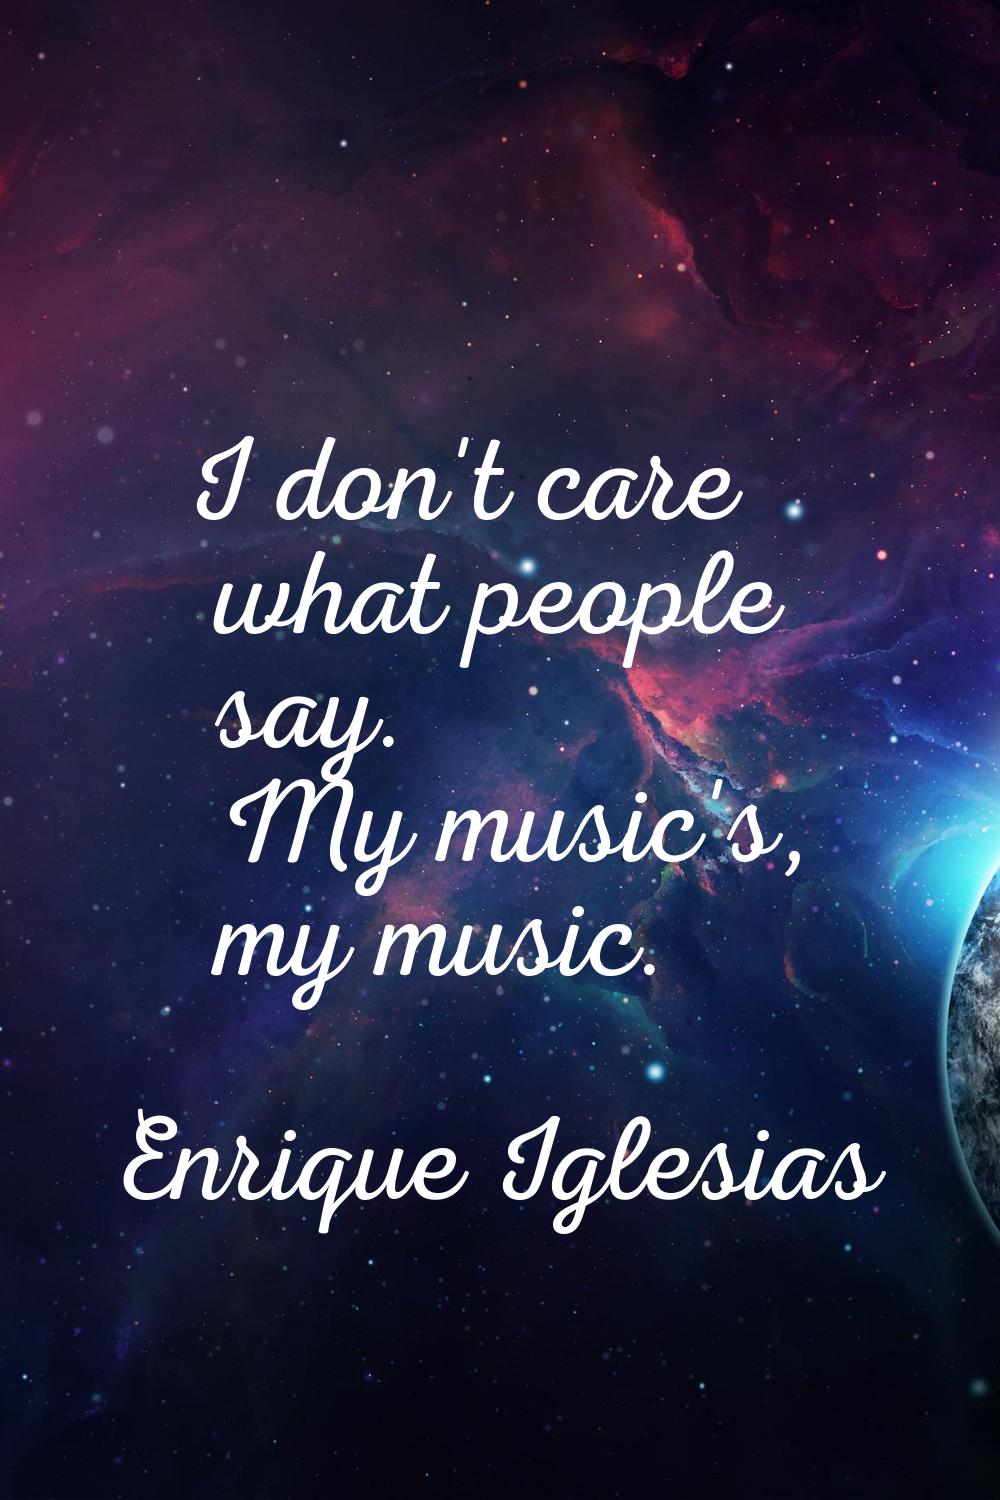 I don't care what people say. My music's, my music.